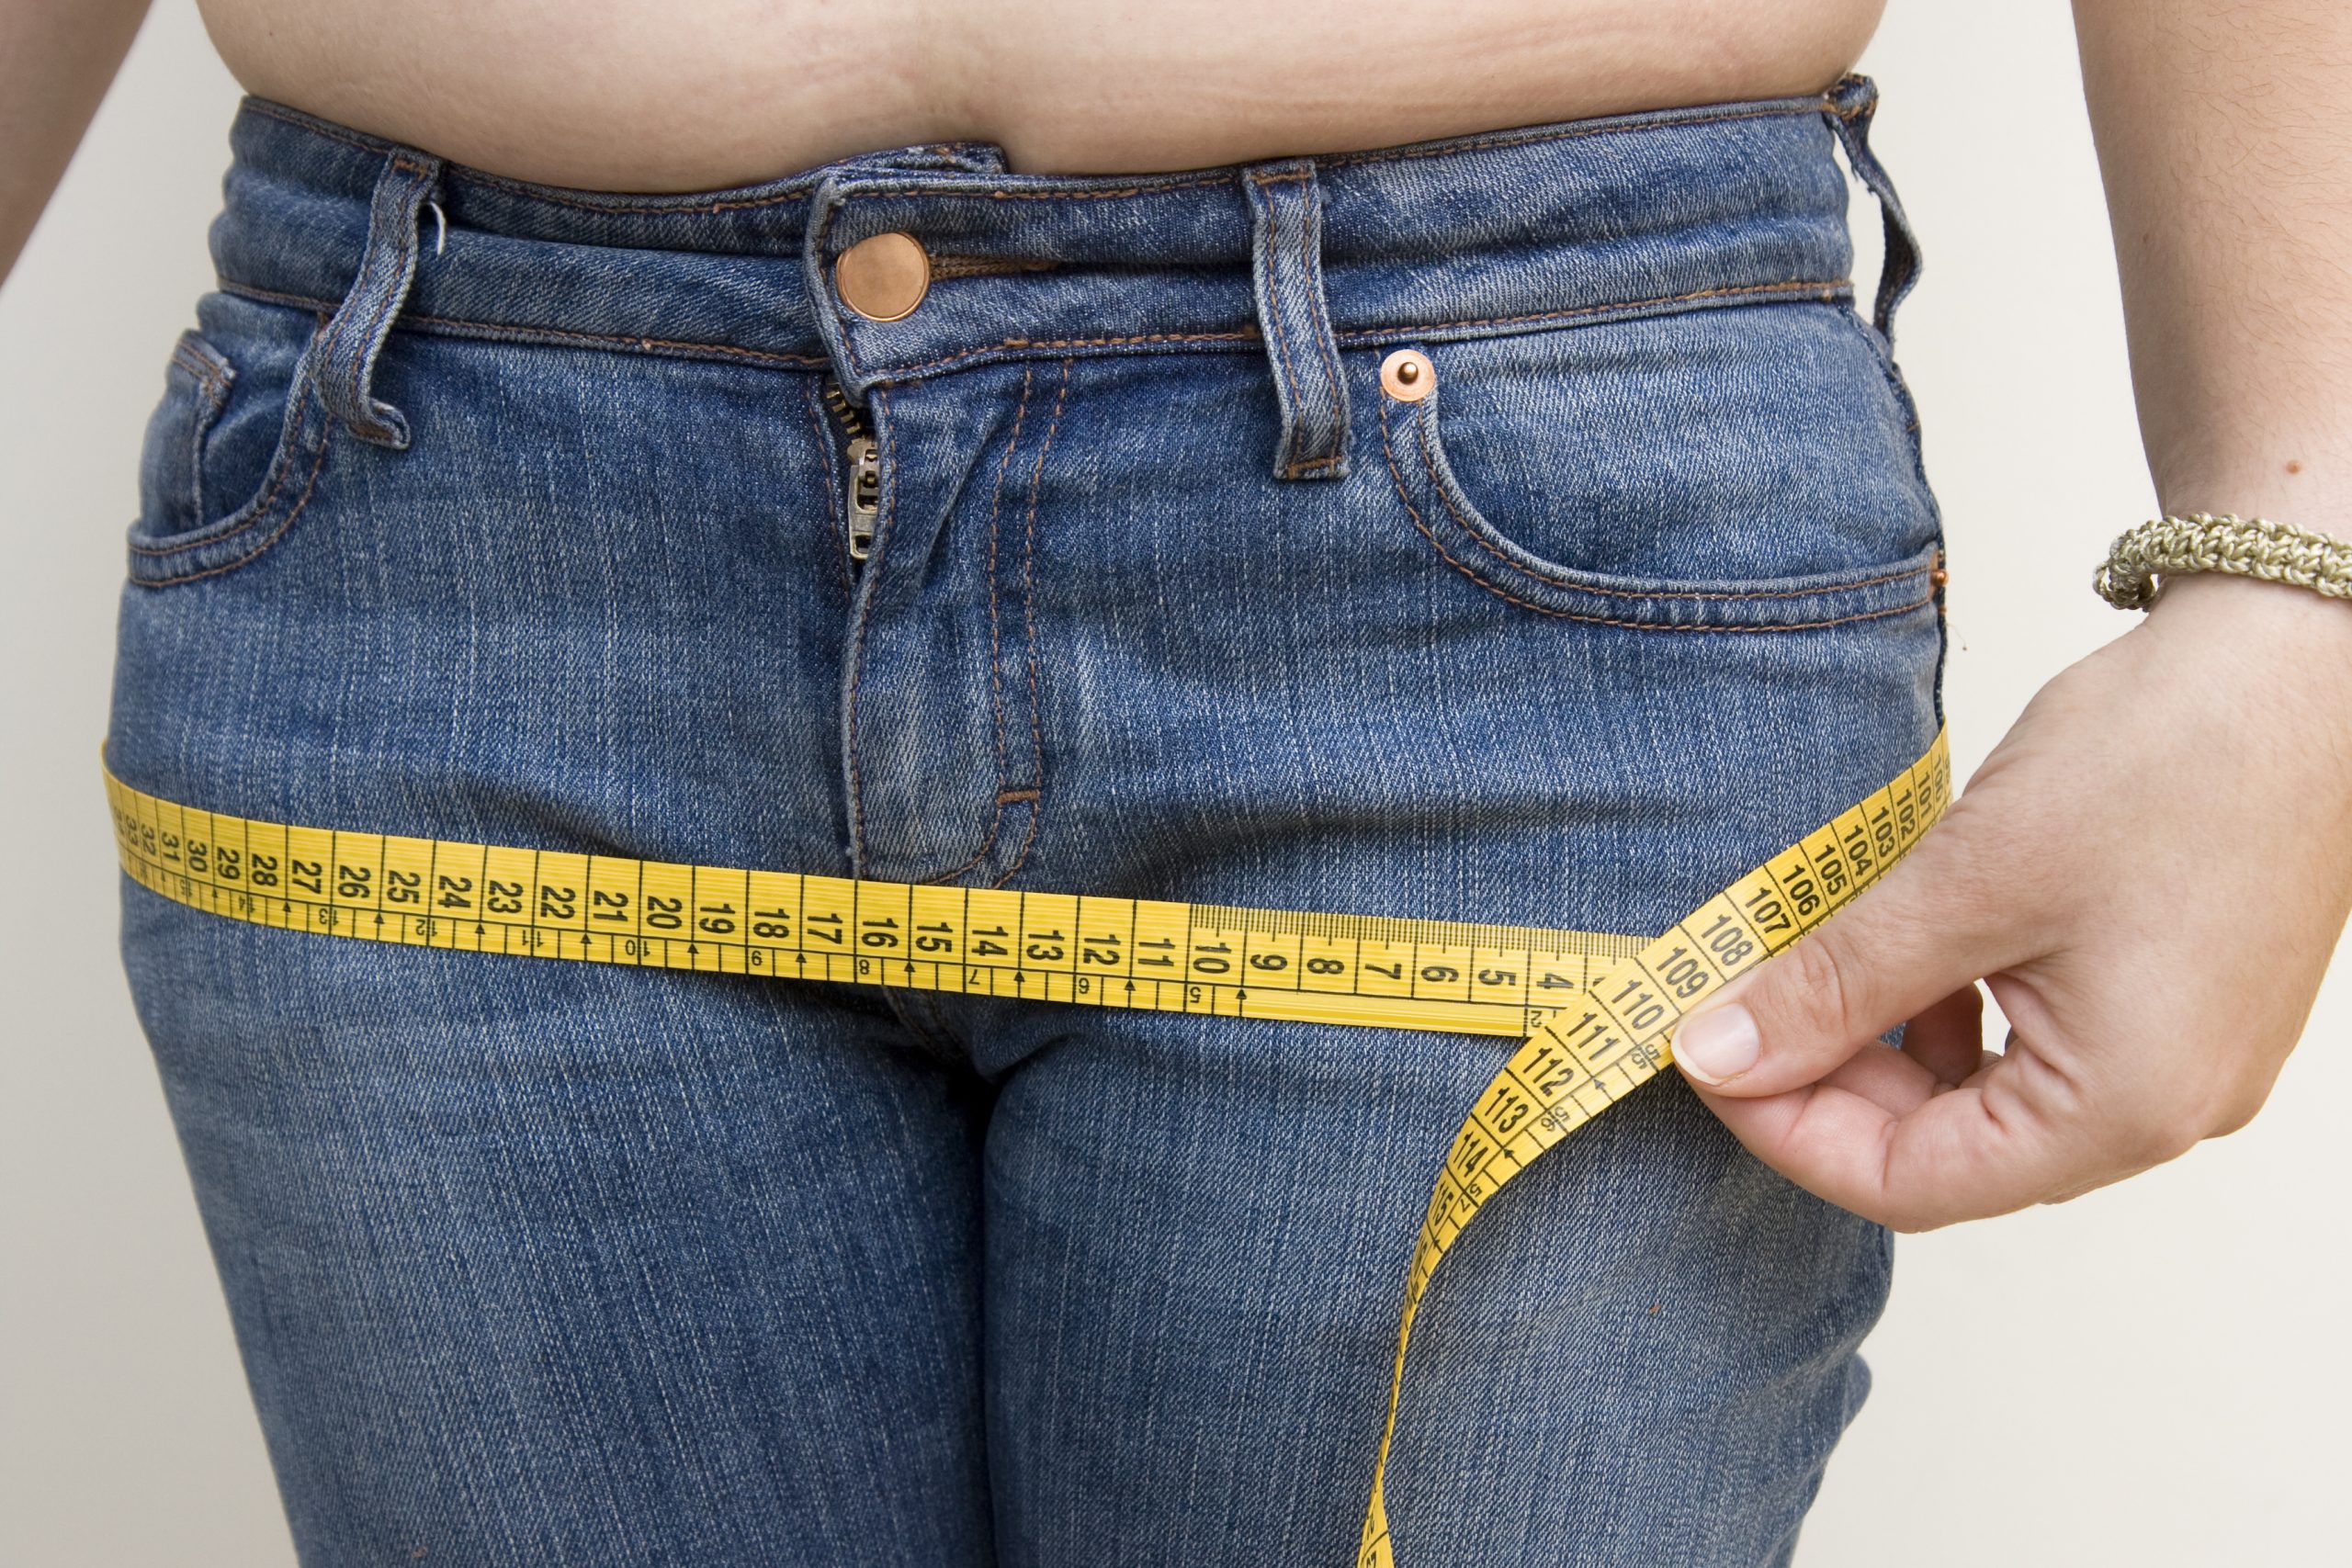 Waist-to-hip ratio: How does it affect your health?